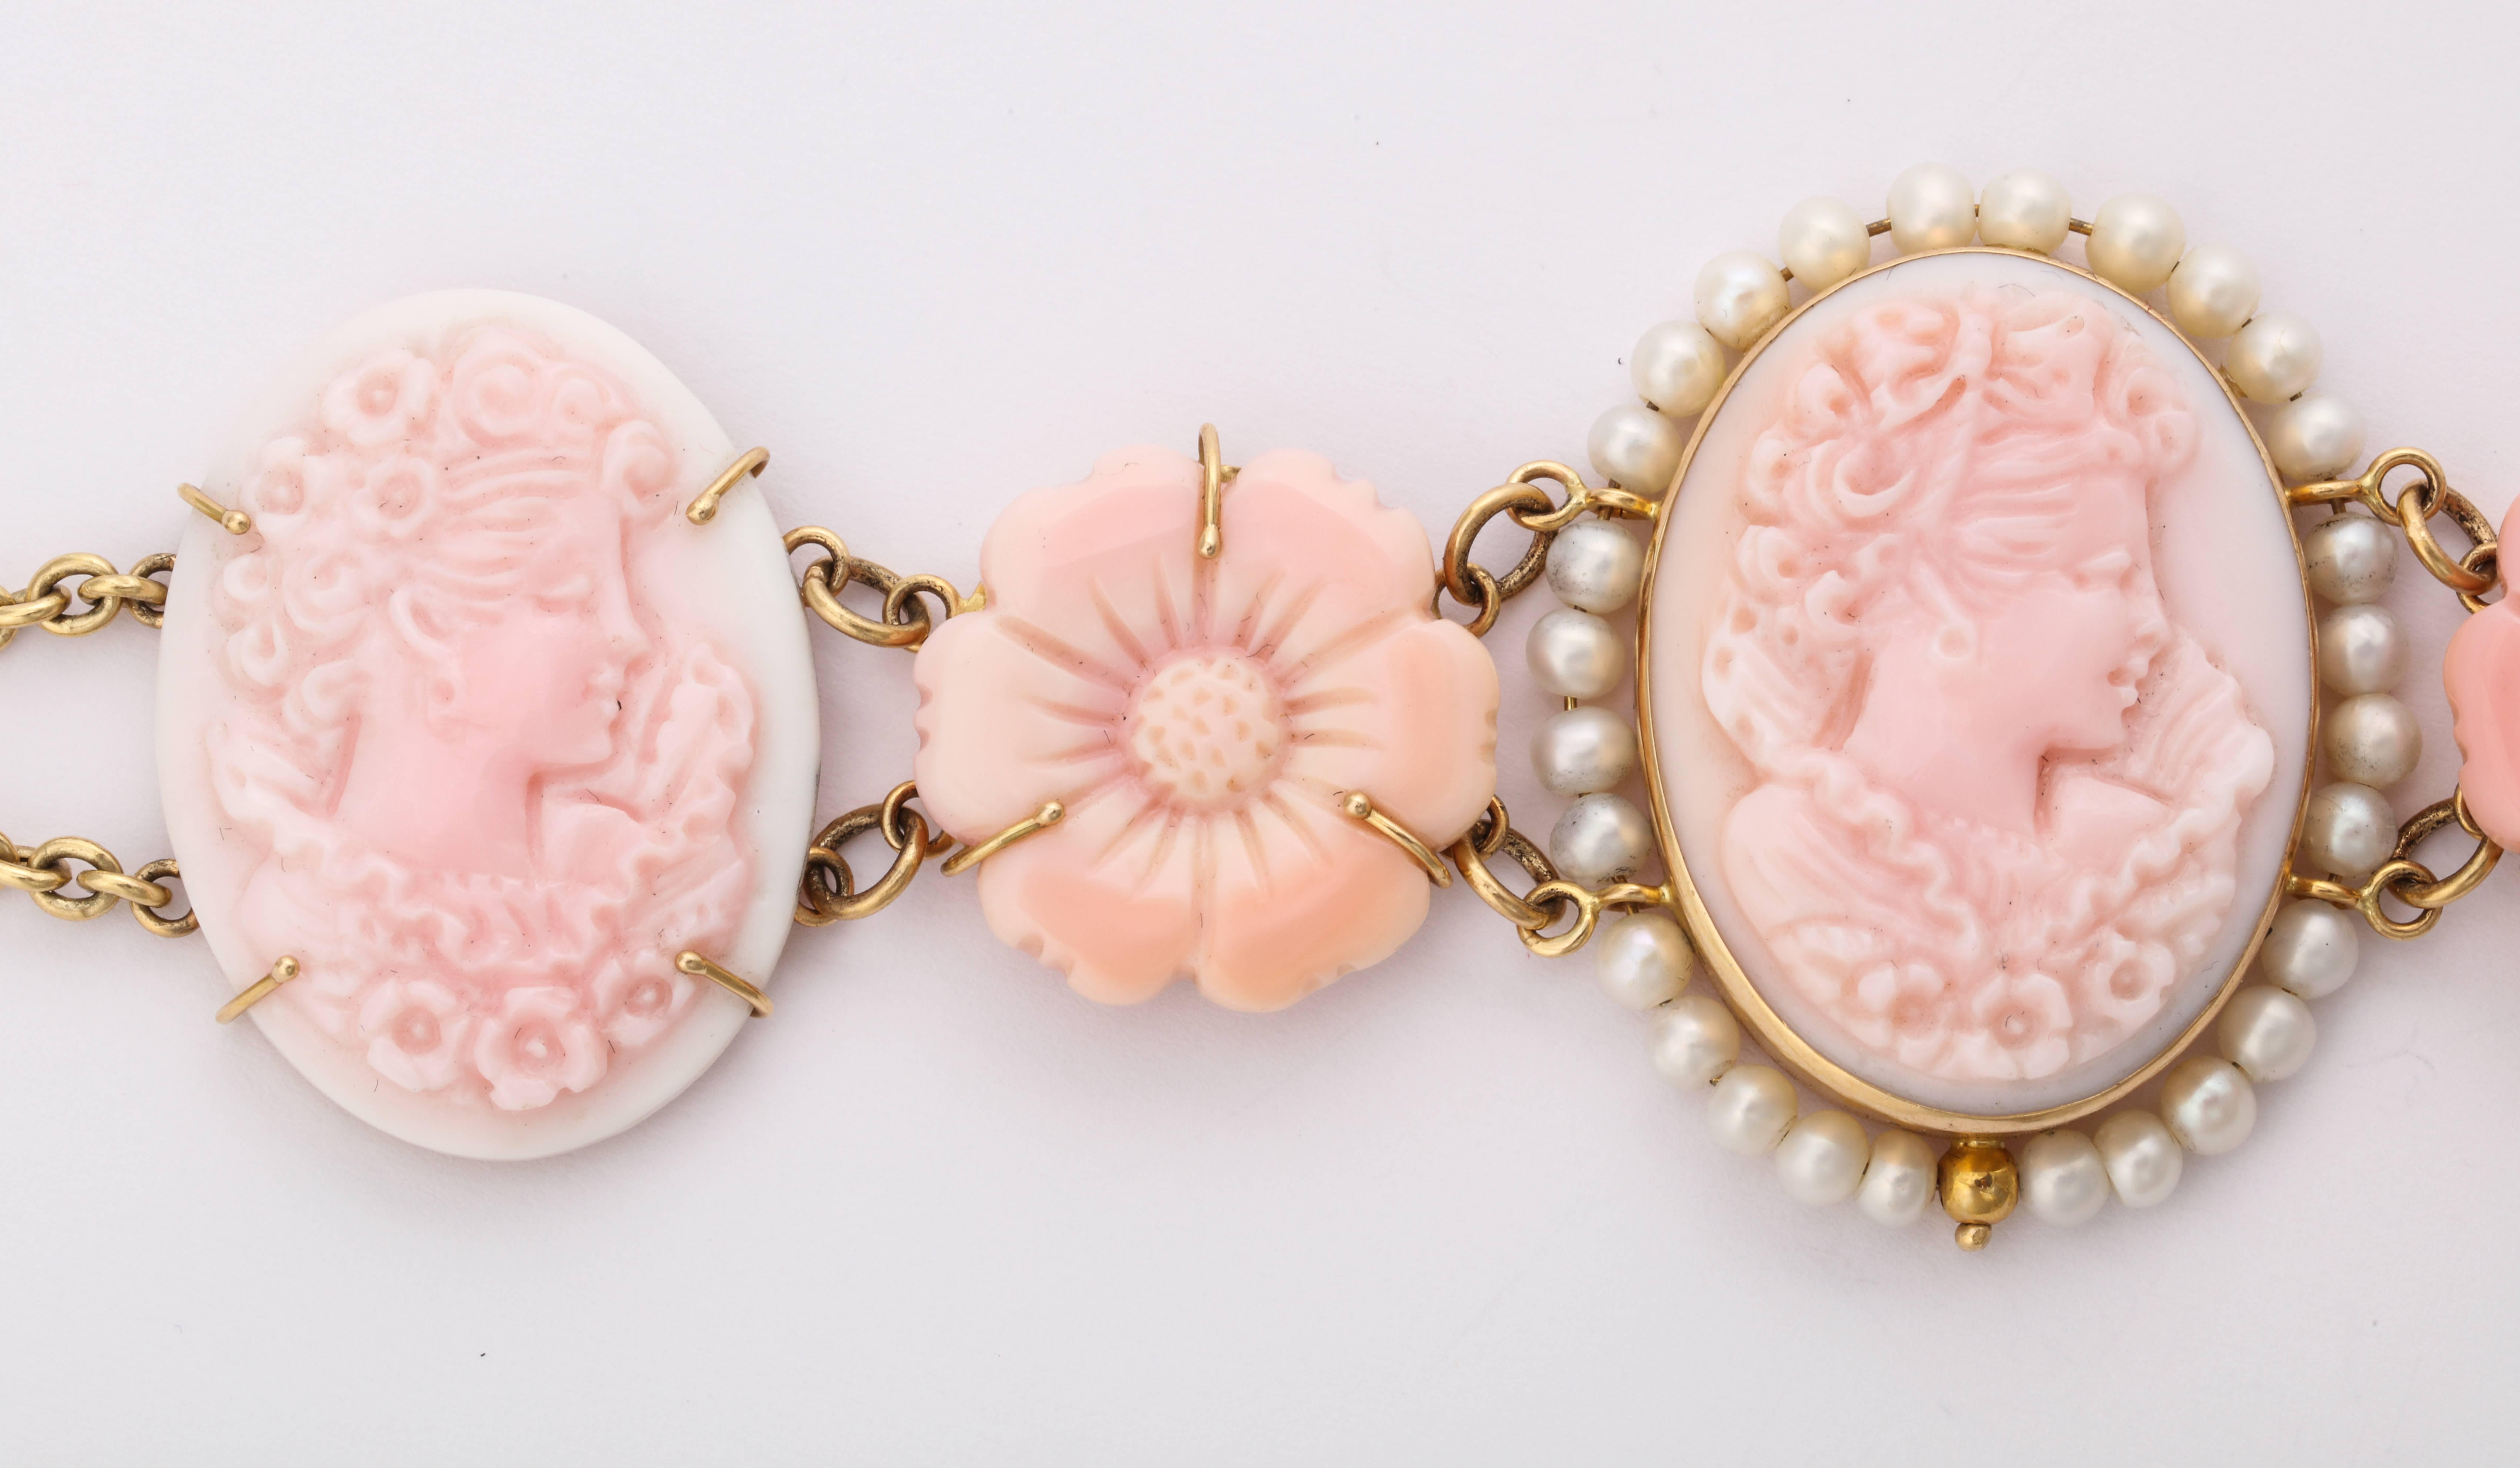 Hand carved pink shell cameos, set in 14kt gold bracelet with fresh water pearls.